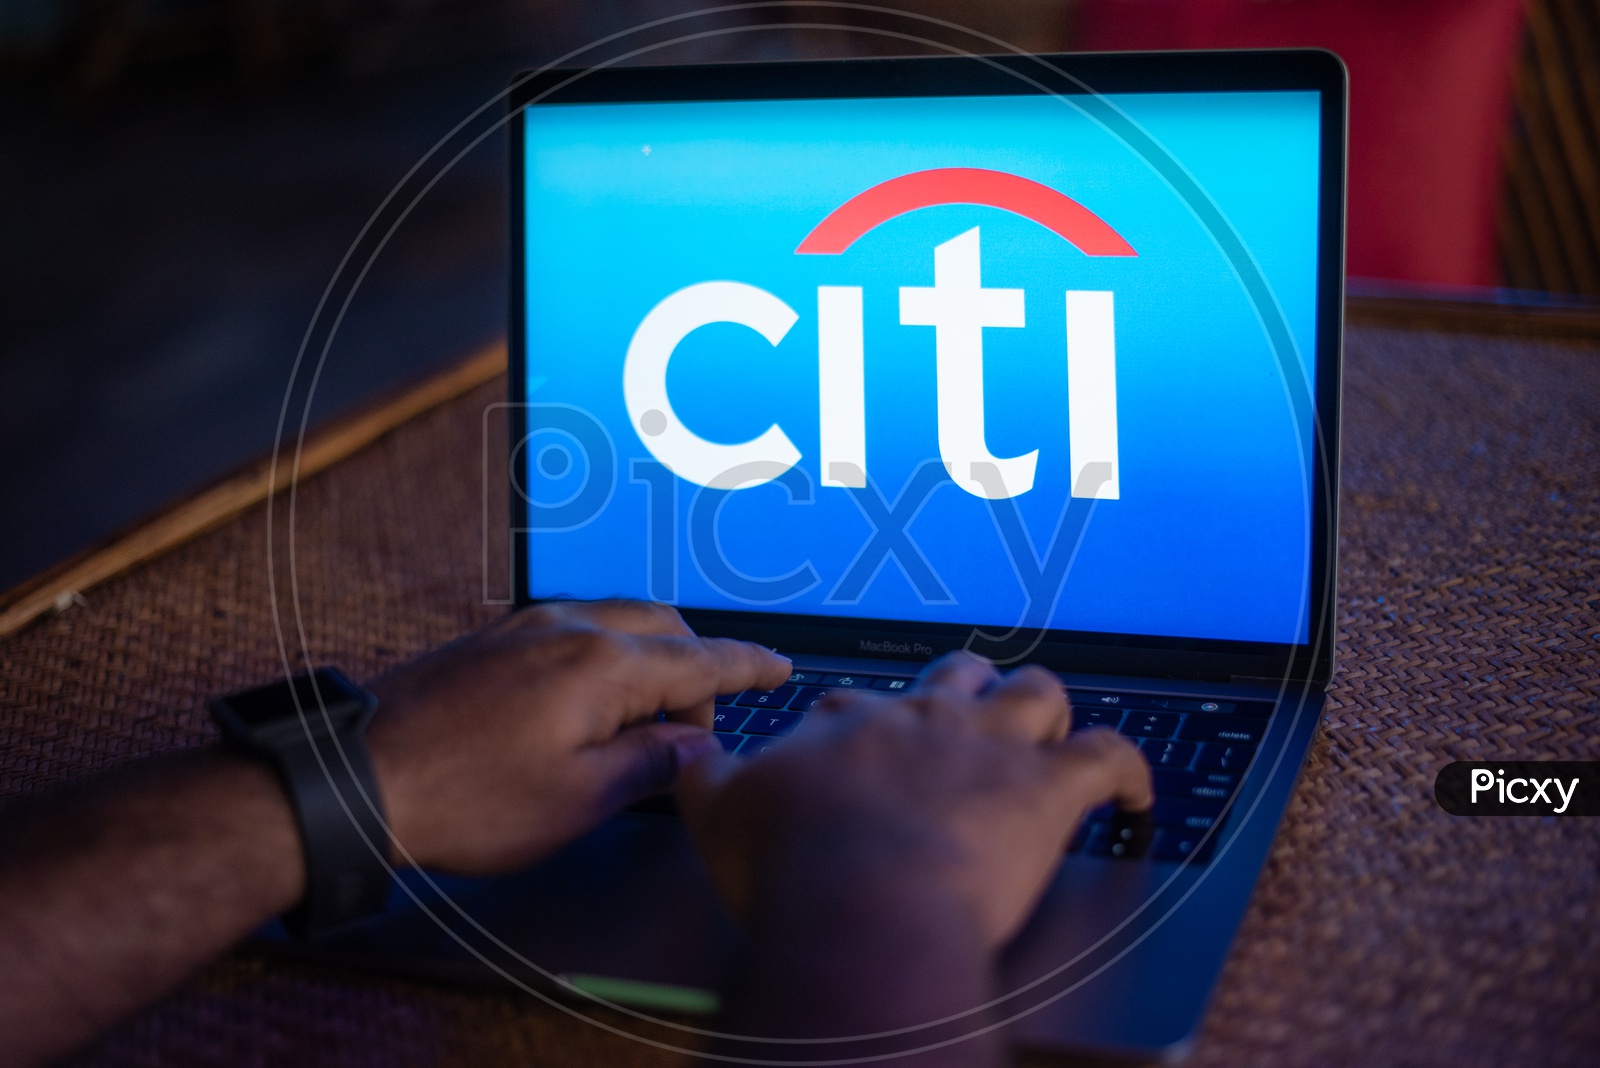 Indian Youth Accessing Online Banking Of  Citi  BANK  in Laptop